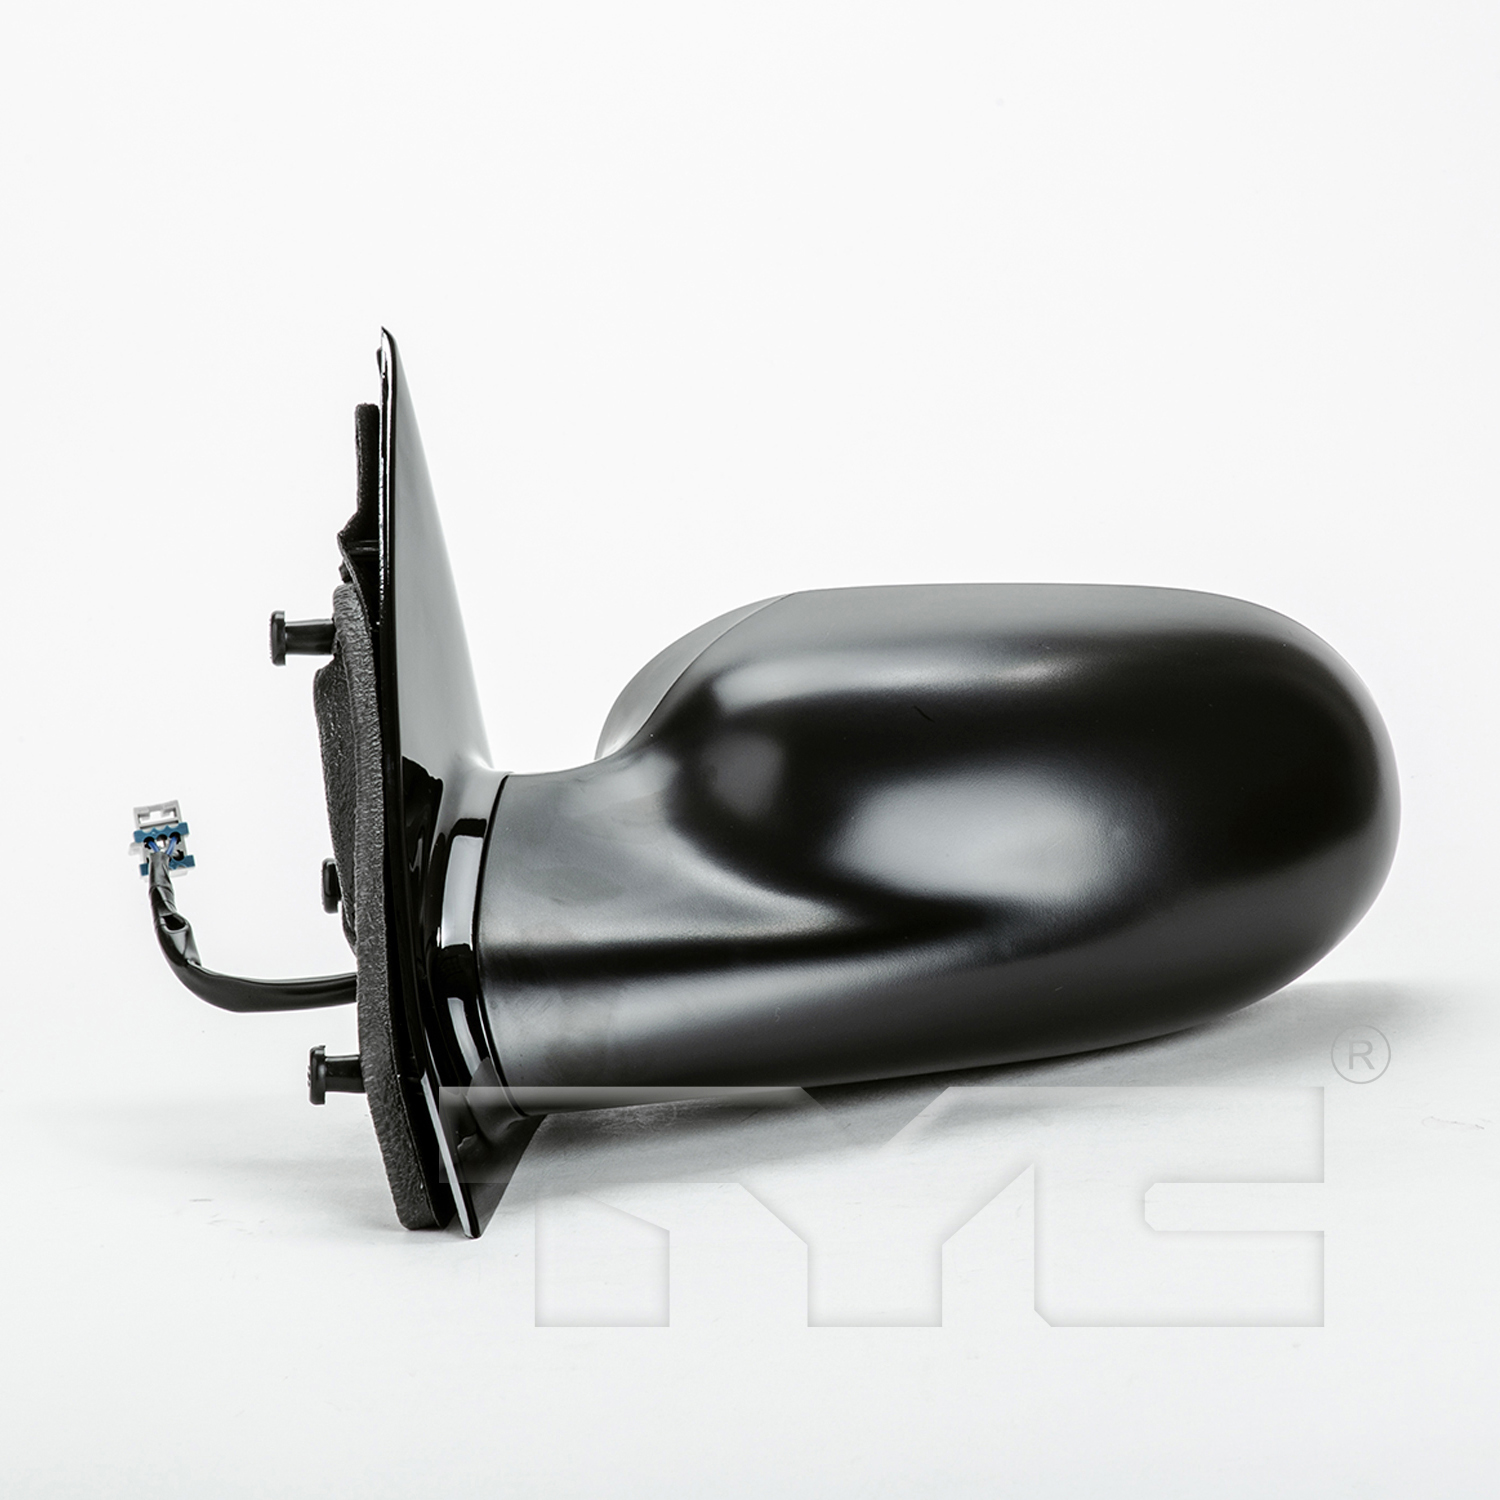 Aftermarket MIRRORS for SATURN - LS1, LS1,00-00,LT Mirror outside rear view